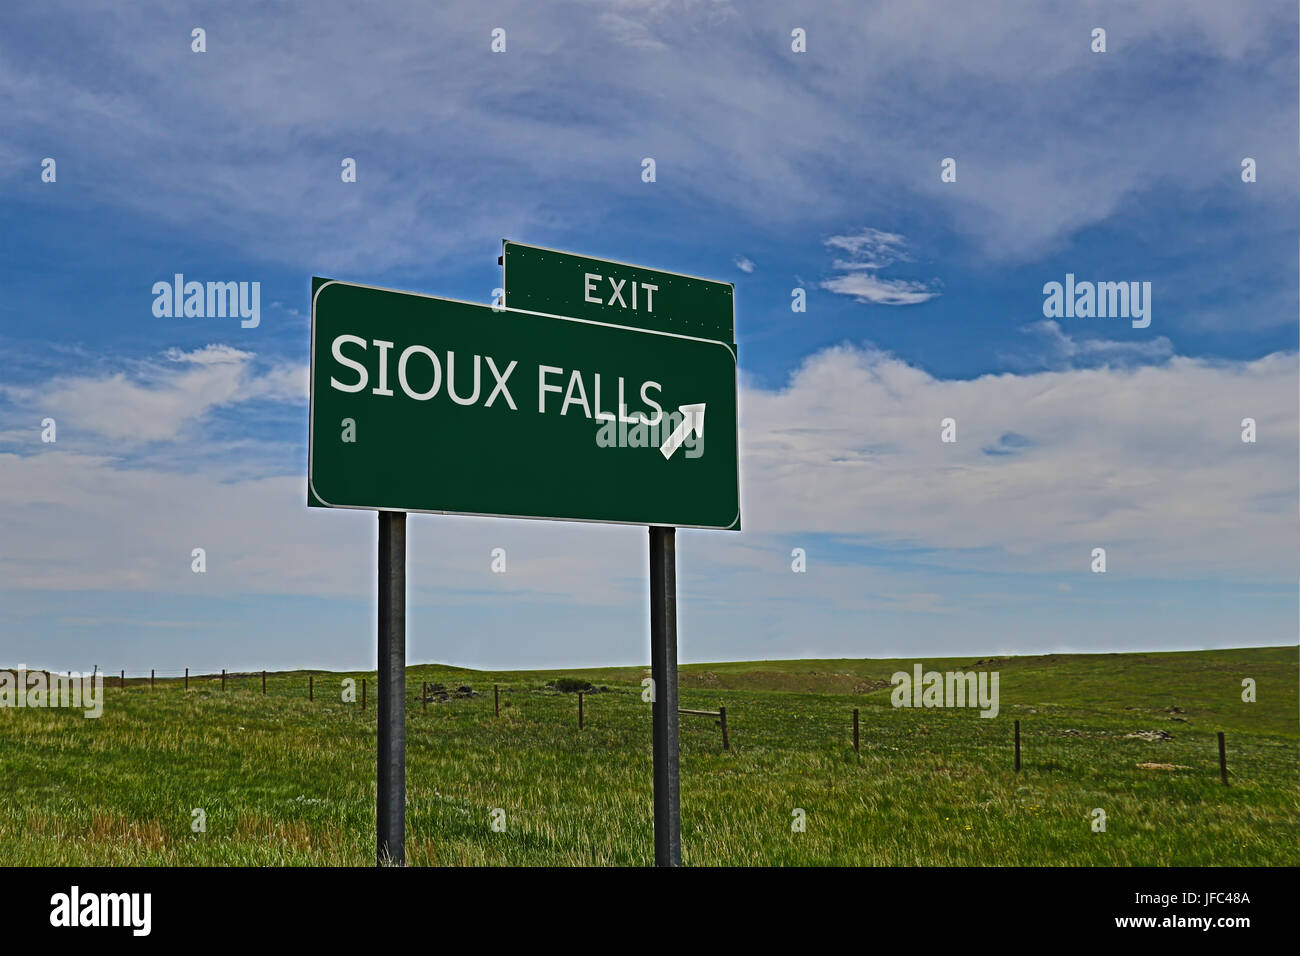 US Highway Exit Sign for Sioux Falls Stock Photo